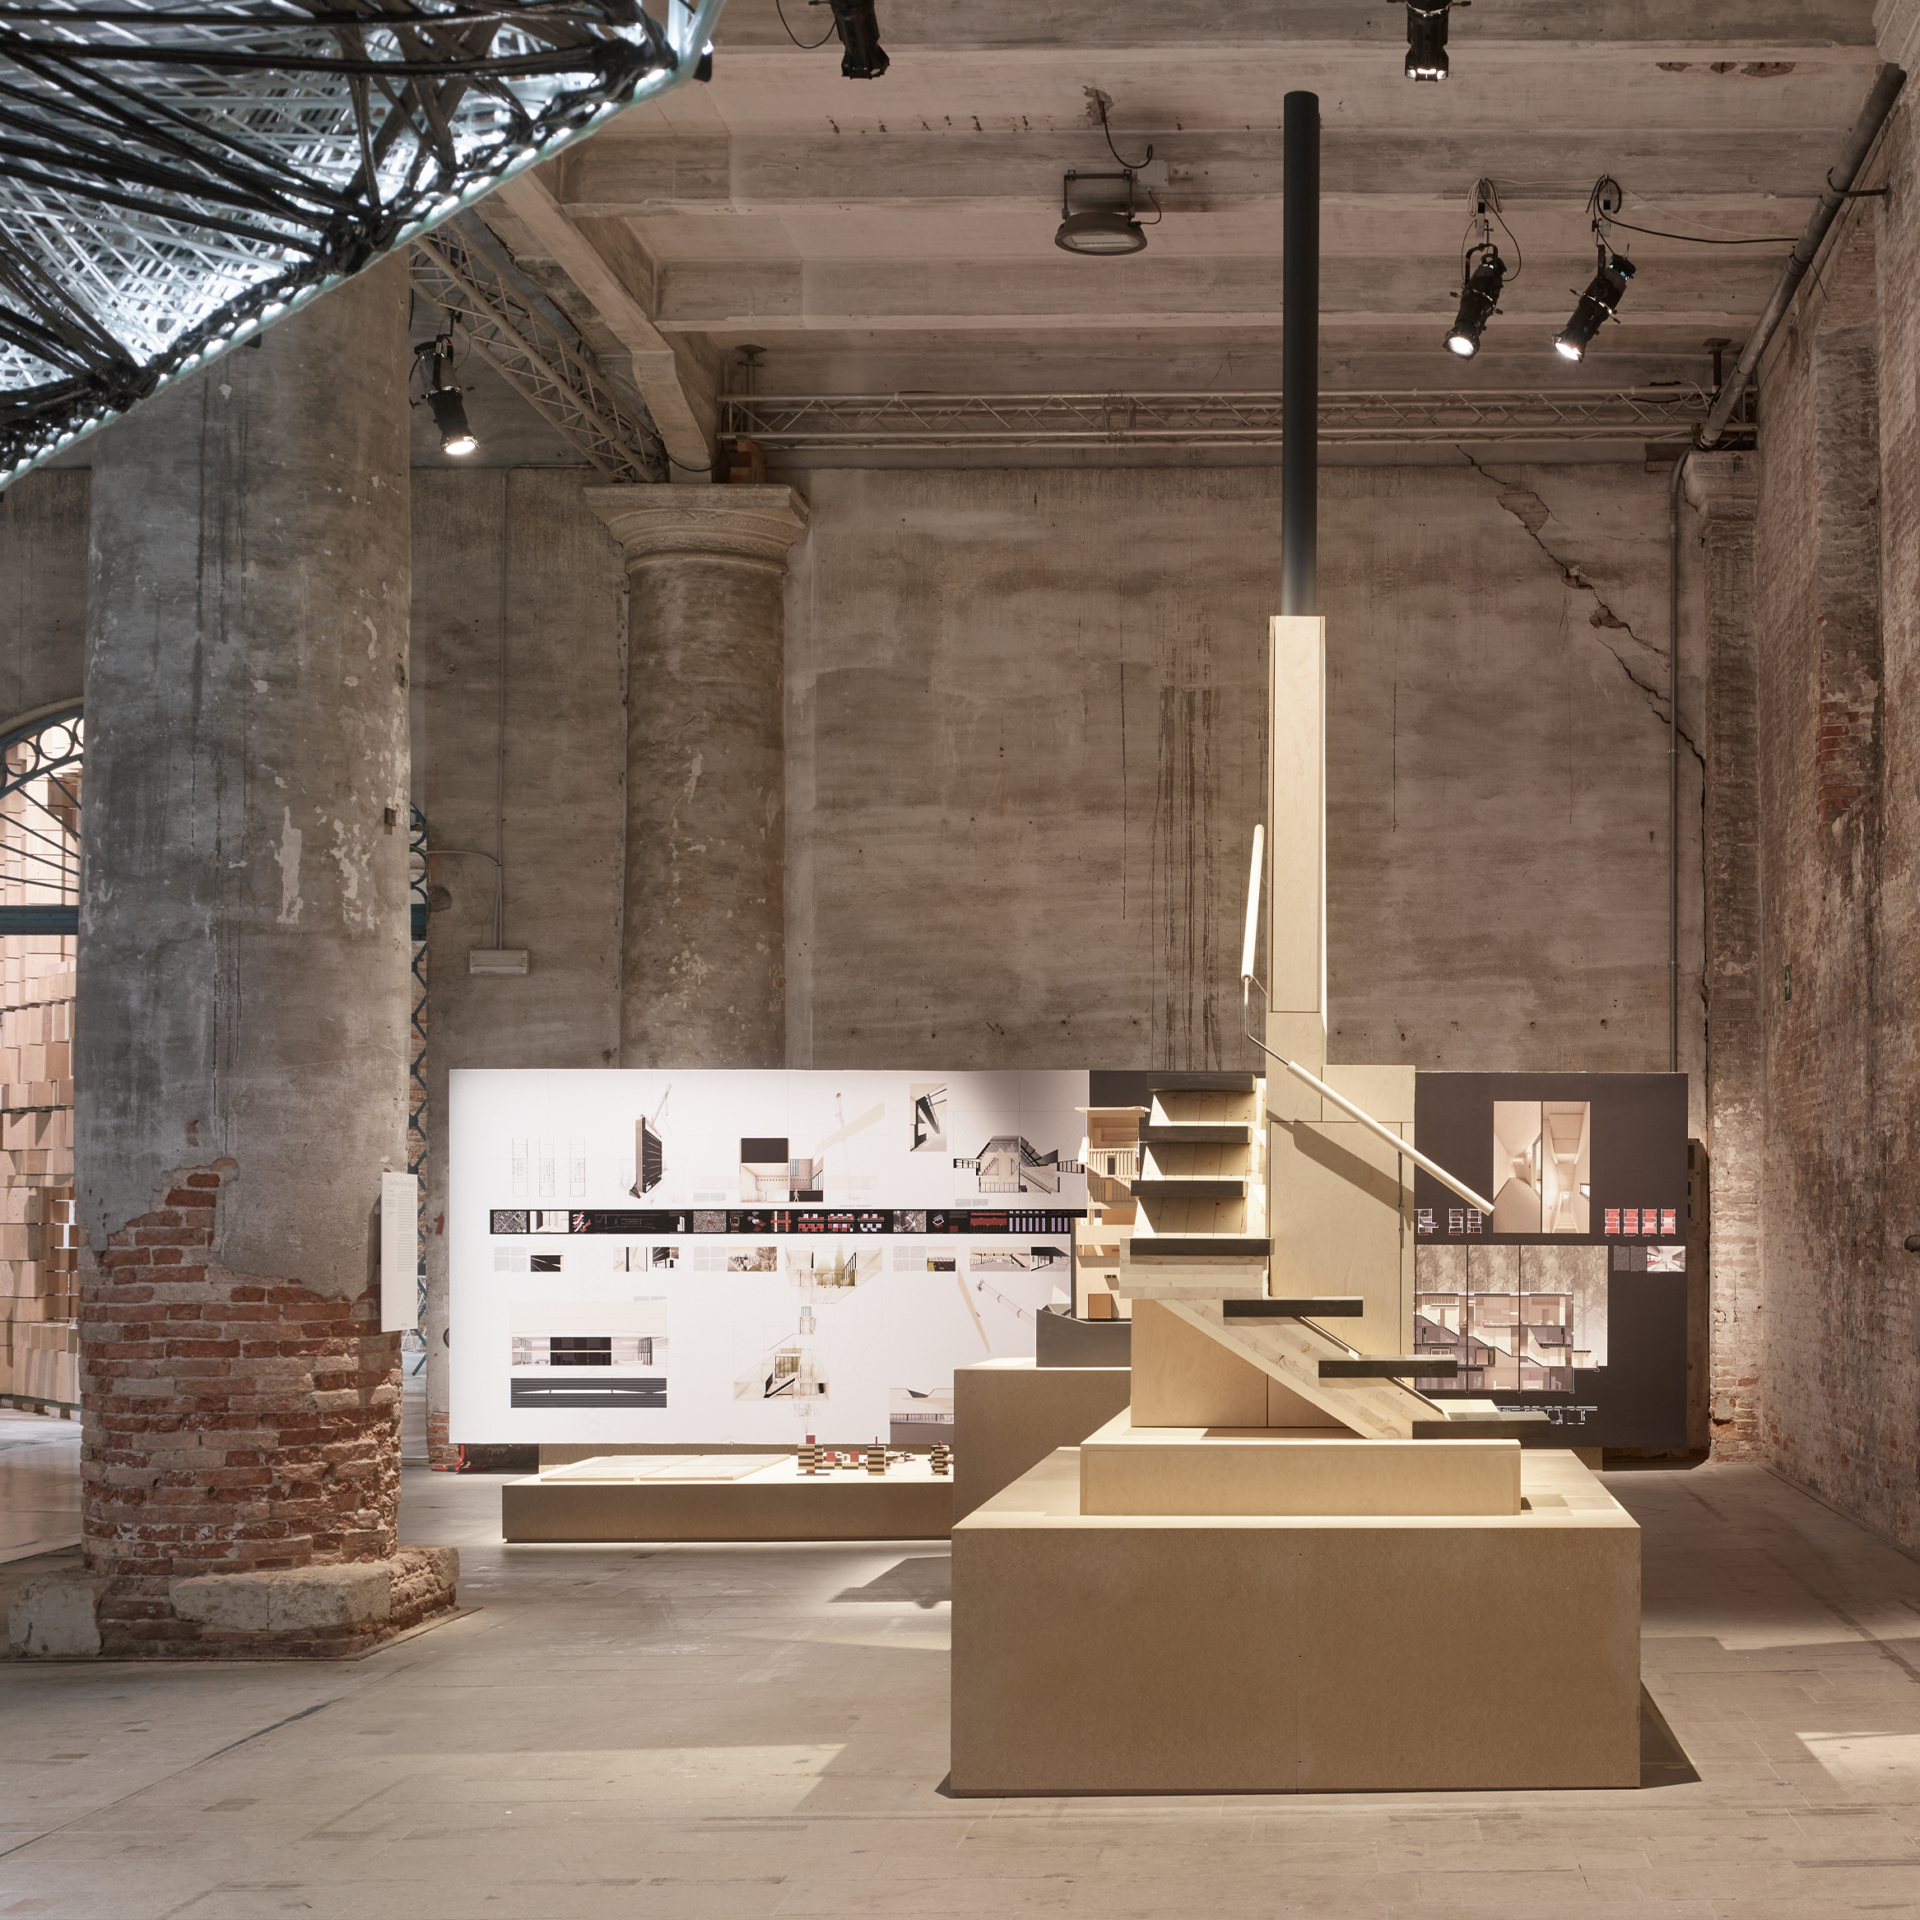 VENICE BIENNALE: OTHER WAYS OF LIVING TOGETHER